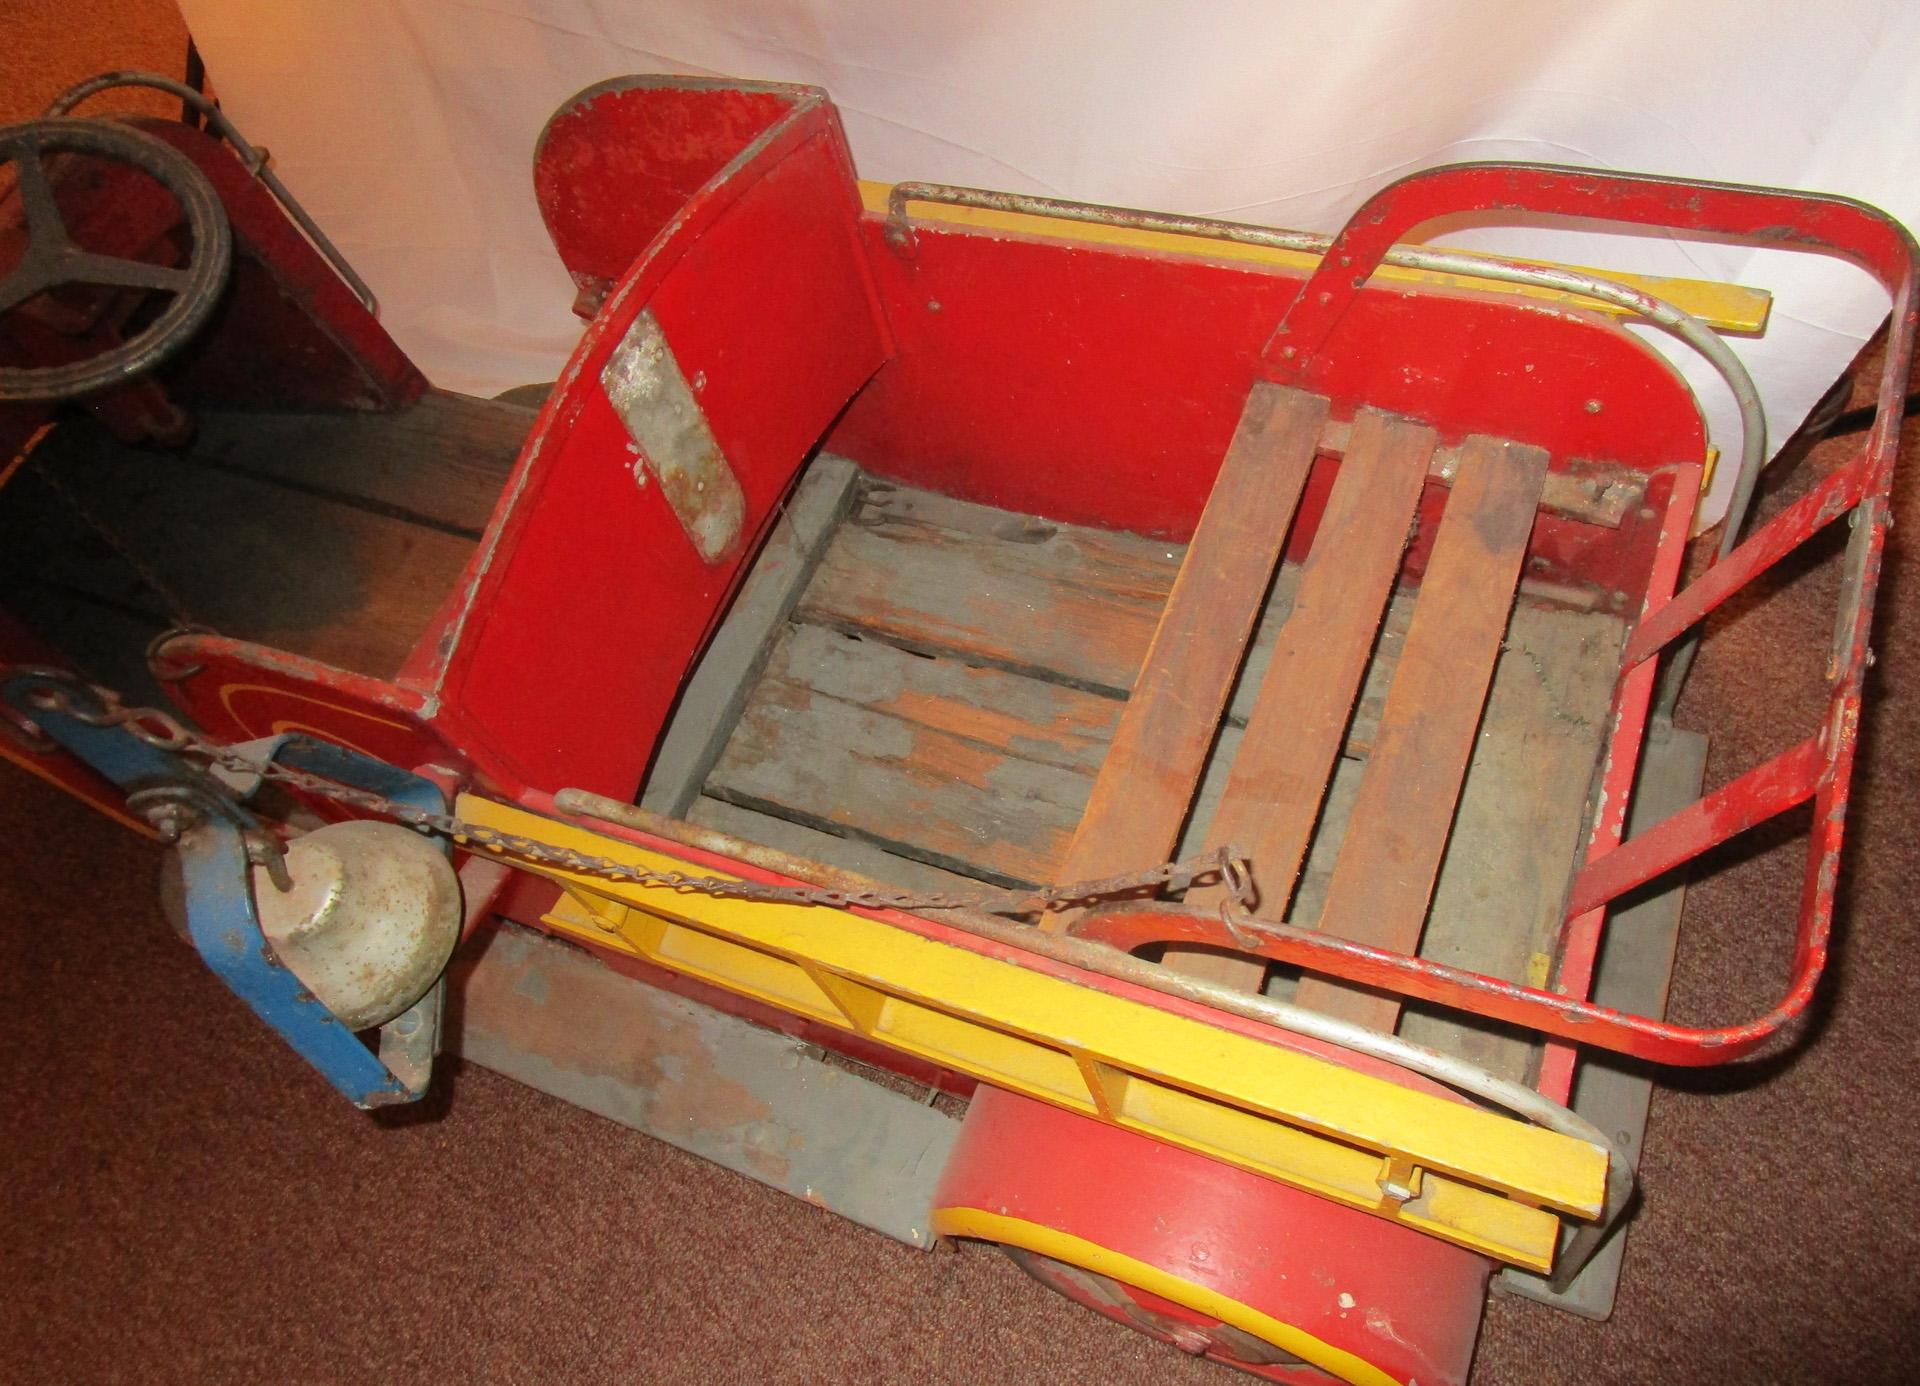 Produced by Pinto Bros Mfg of Coney Island, New York, this all-original 1940s firetruck was part of a circular ride at the famed Coney Island Amusement Park. Featuring lucky Number 4 on the side, dual metal ladders, front and back seats with wooden